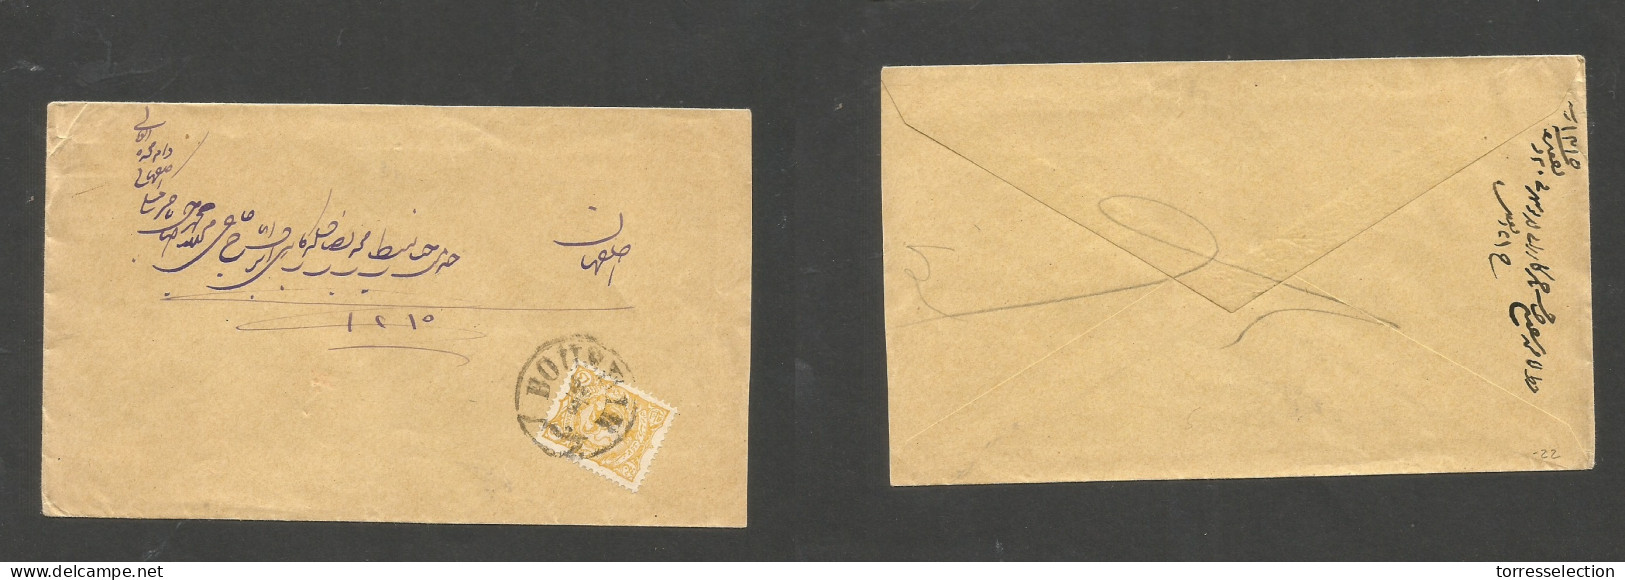 PERSIA. C. 1902 (20 March) Boushir Local Fkd 5c Brown Yellow Cds. Fine. SALE. - Irán